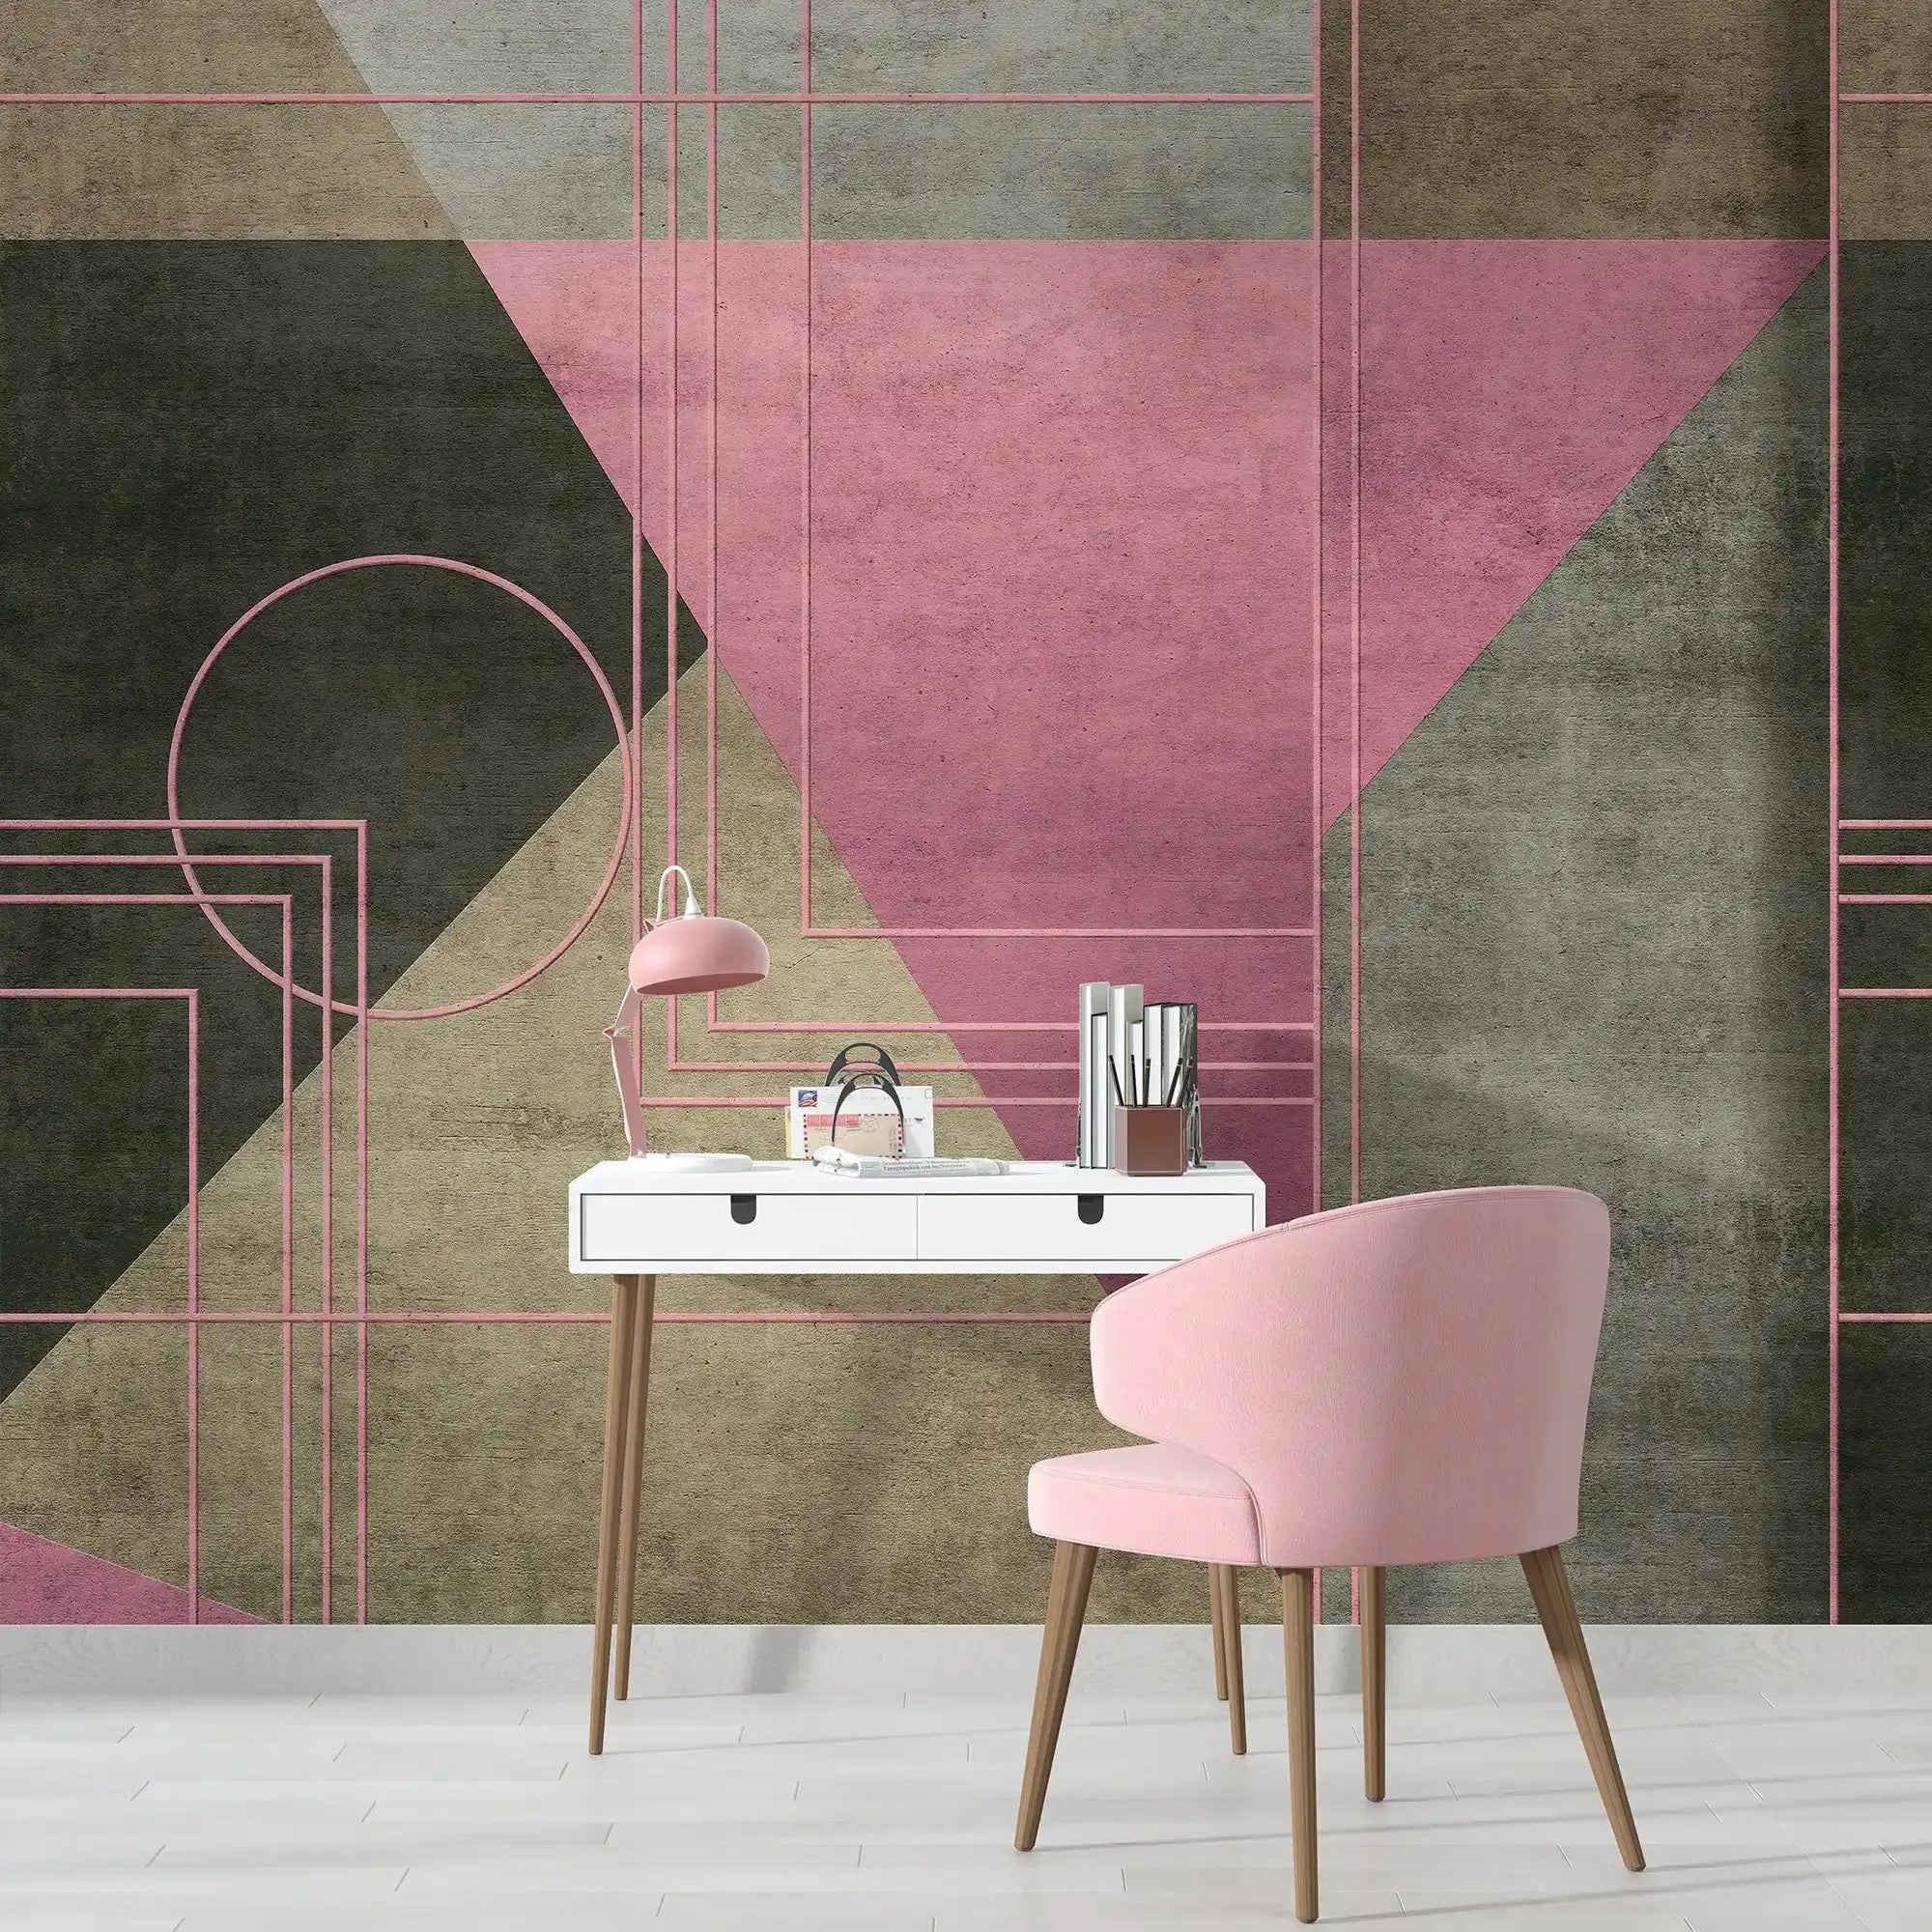 3079-C / Peel and Stick Geometric Wallpaper: Gold Accents, Modern Decor for Walls - DIY Self Adhesive, Removable, Abstract Art Deco Design - Artevella